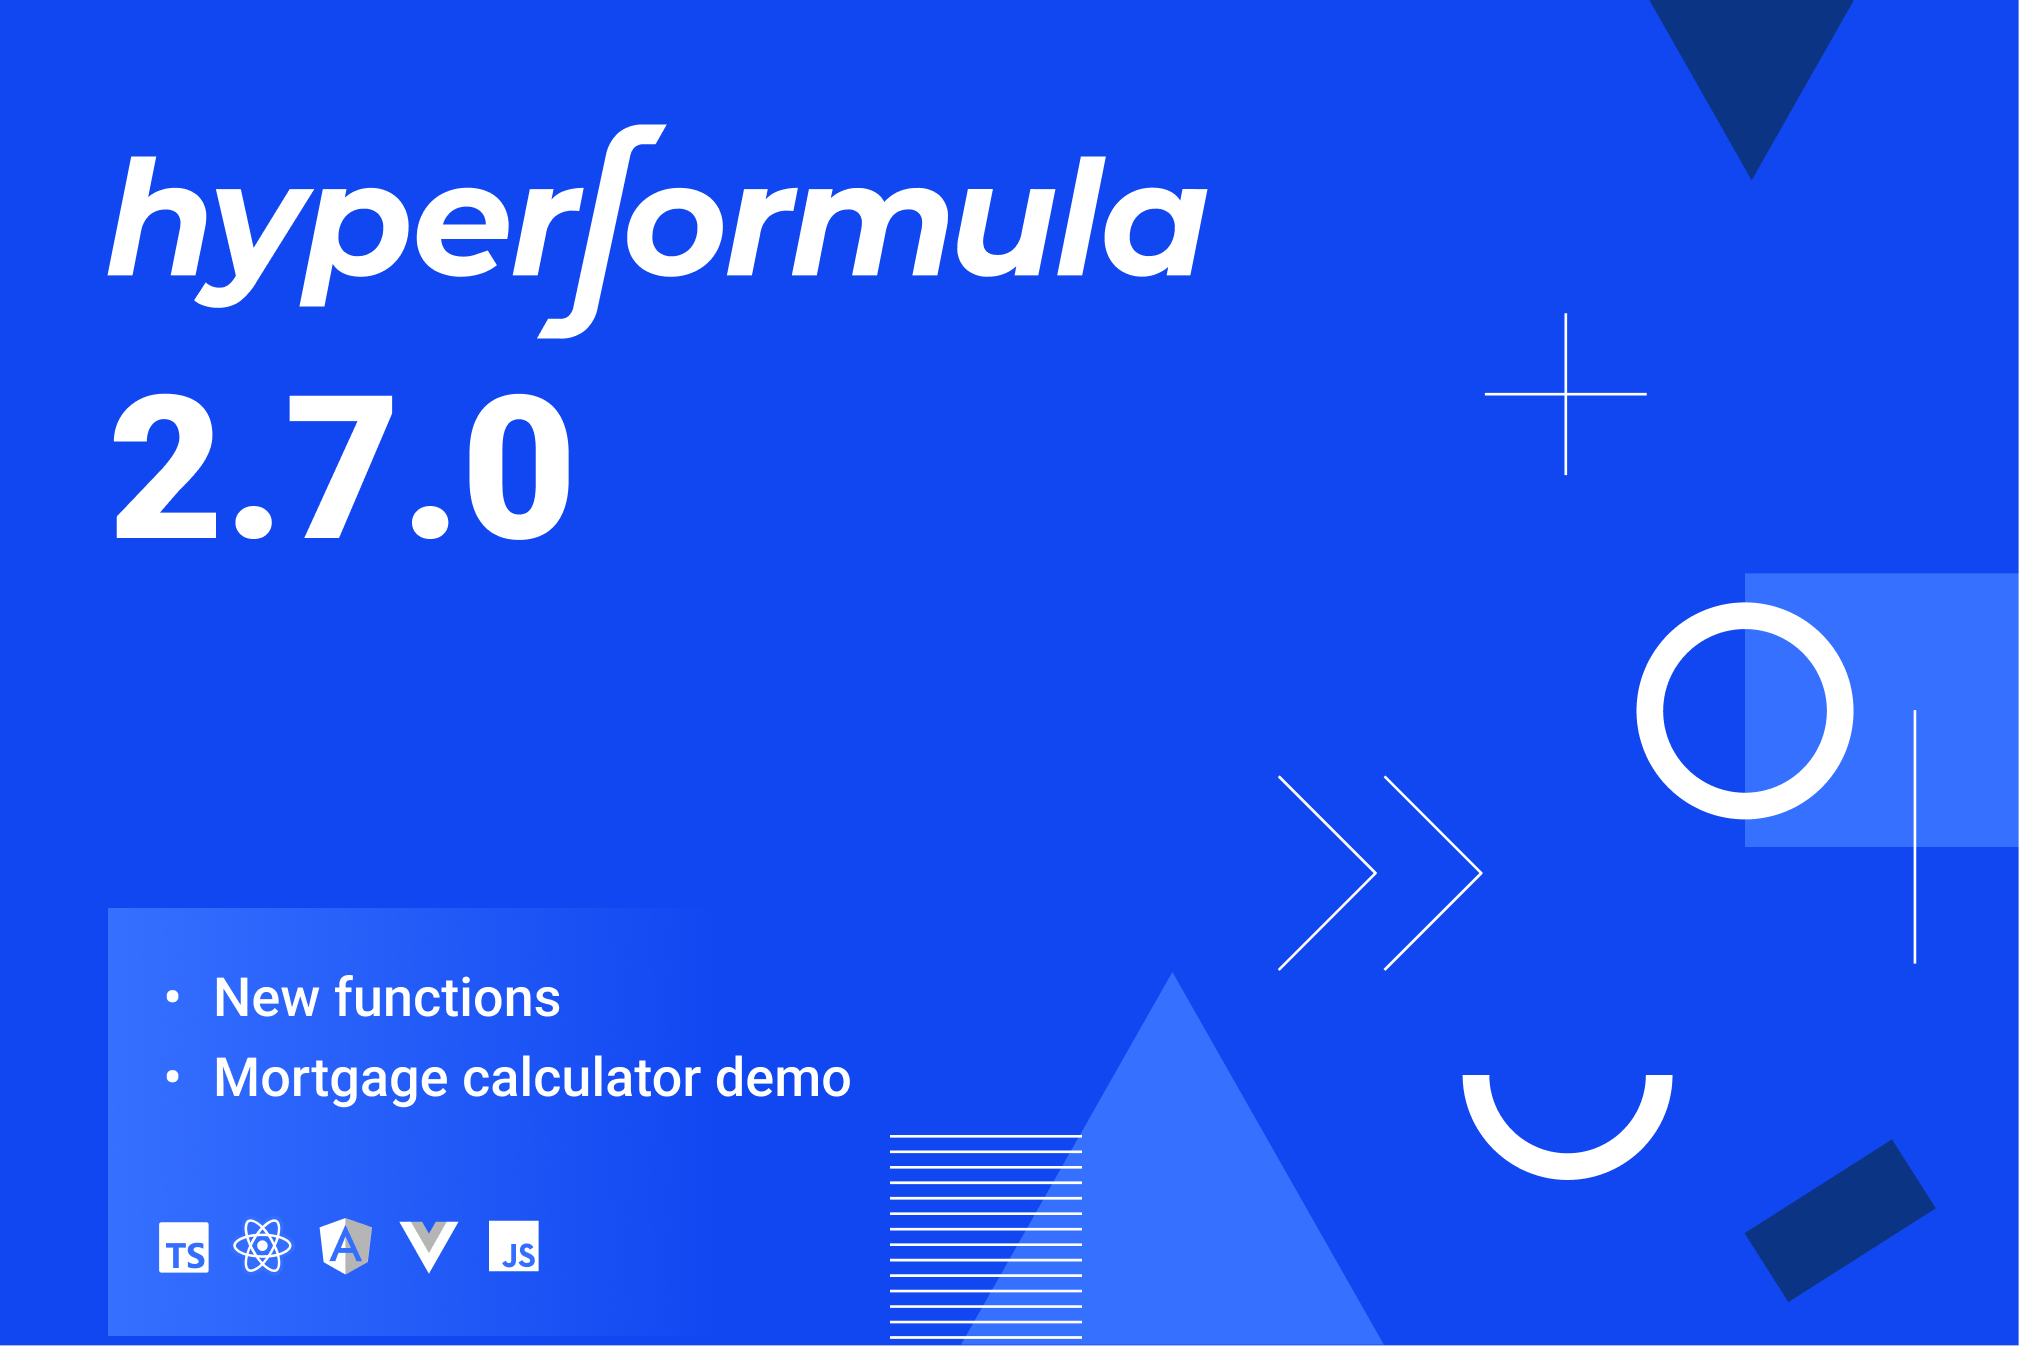 Illustration for a blog post - HyperFormula 2.7.0: New functions and mortgage calculator demo